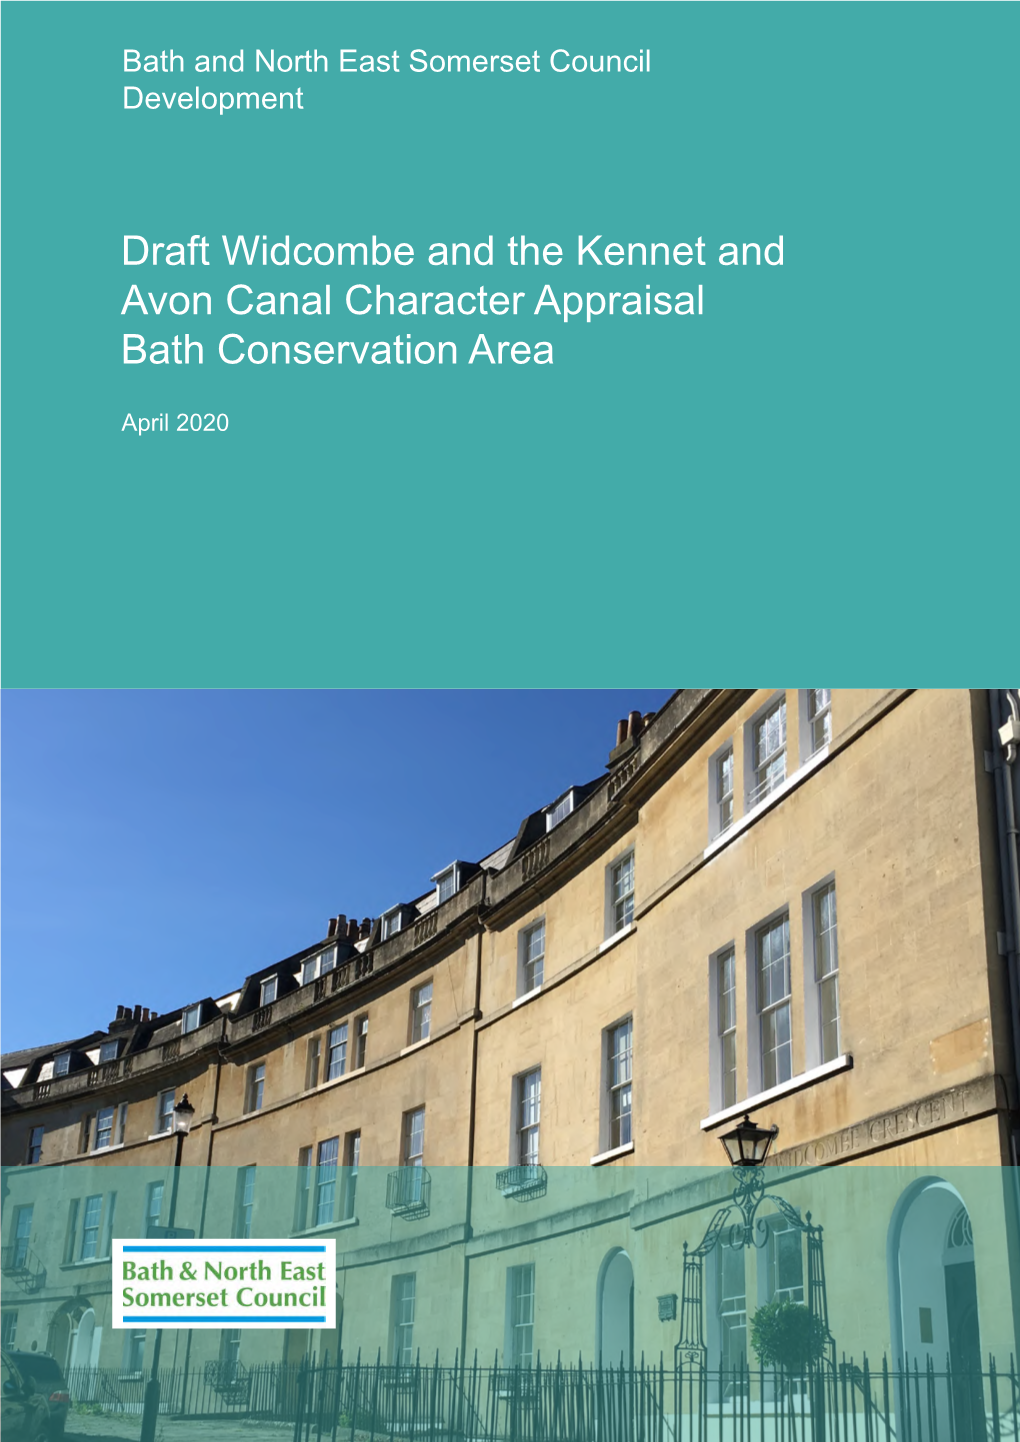 Draft Widcombe and the Kennet and Avon Canal Character Appraisal Bath Conservation Area